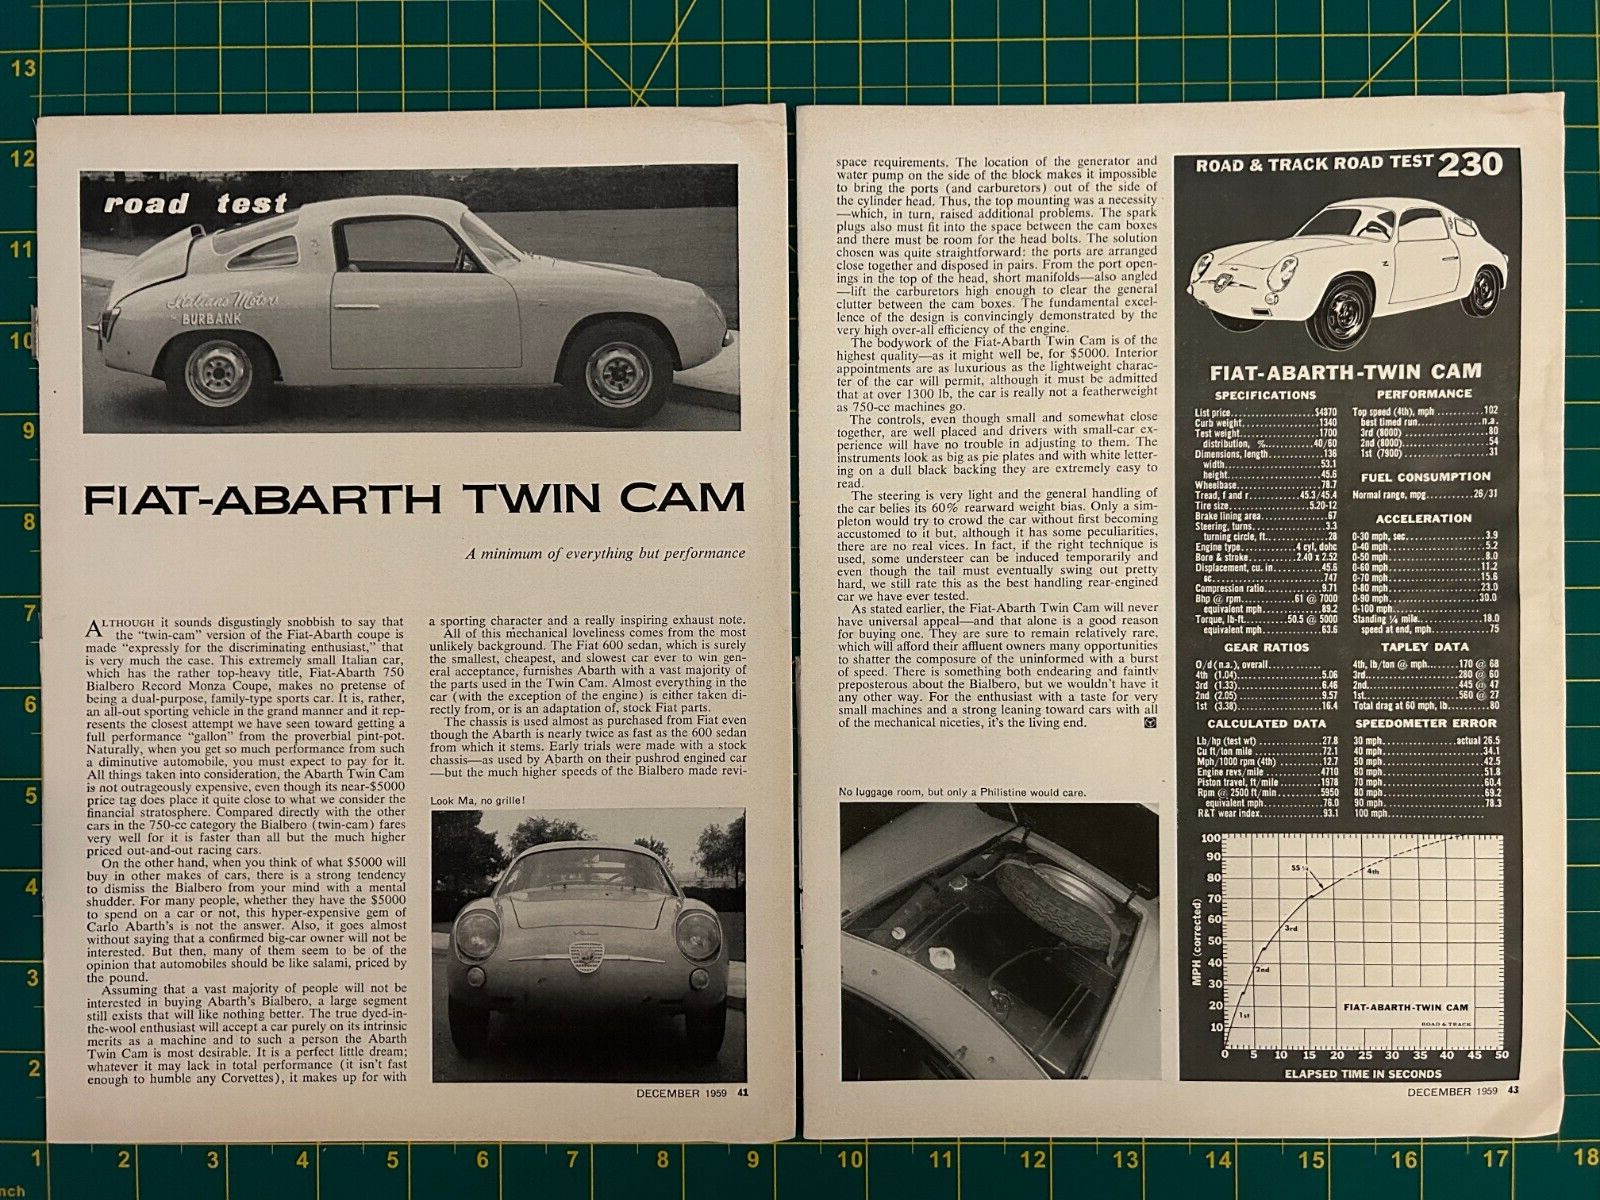 1959 Vintage Fiat-Abarth Twin Cam Road Test 2 sheet 3 page Print Ad W1